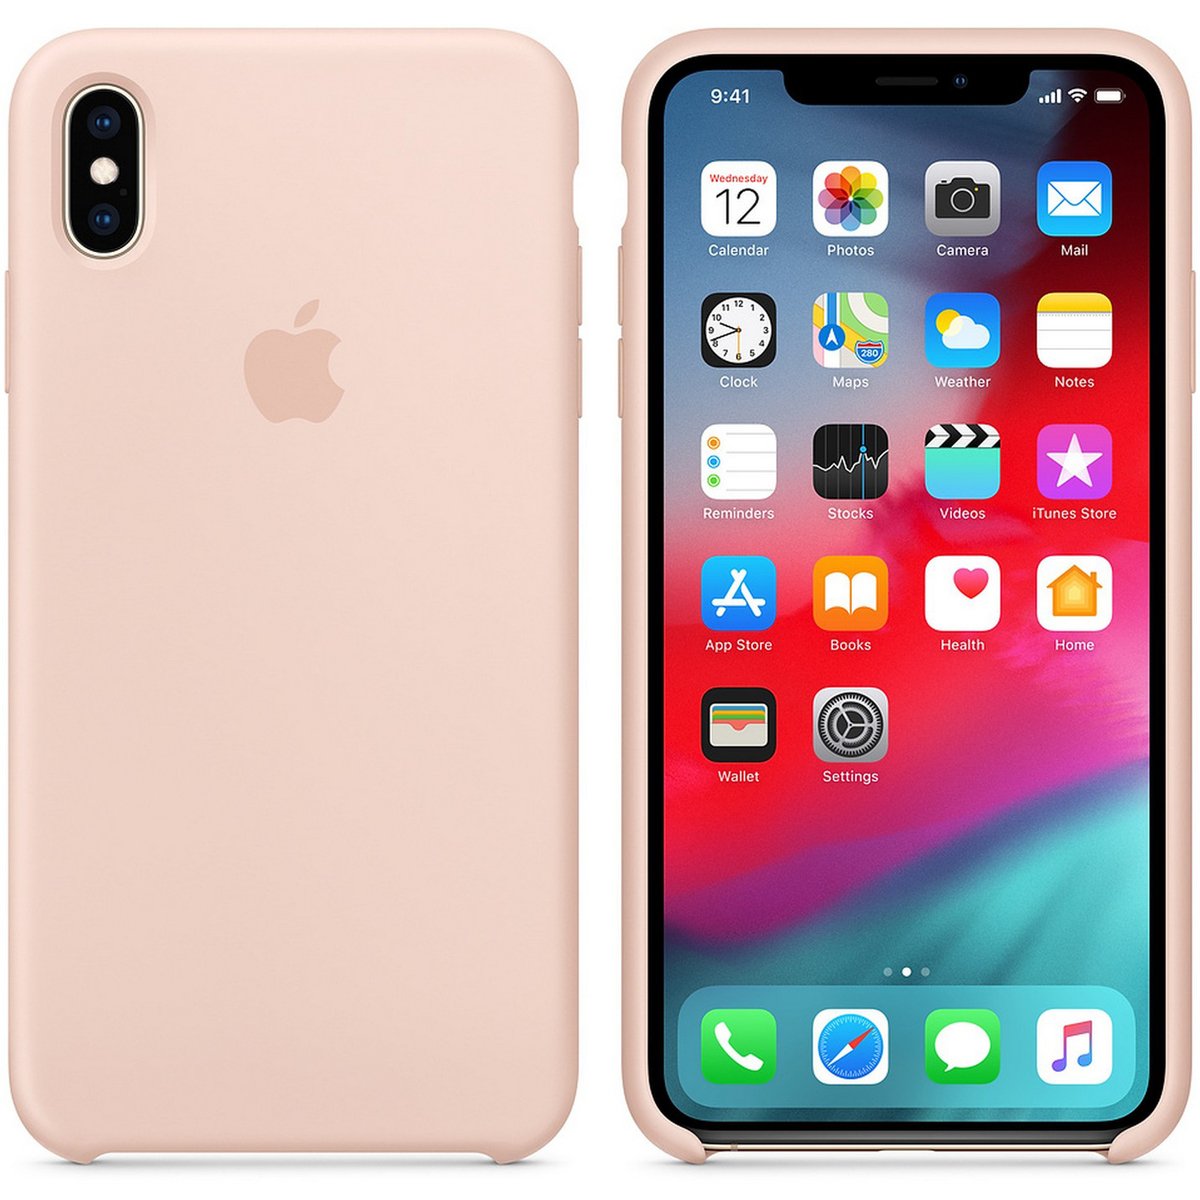 Apple iPhone XS Max Silicone Case Pink Sand